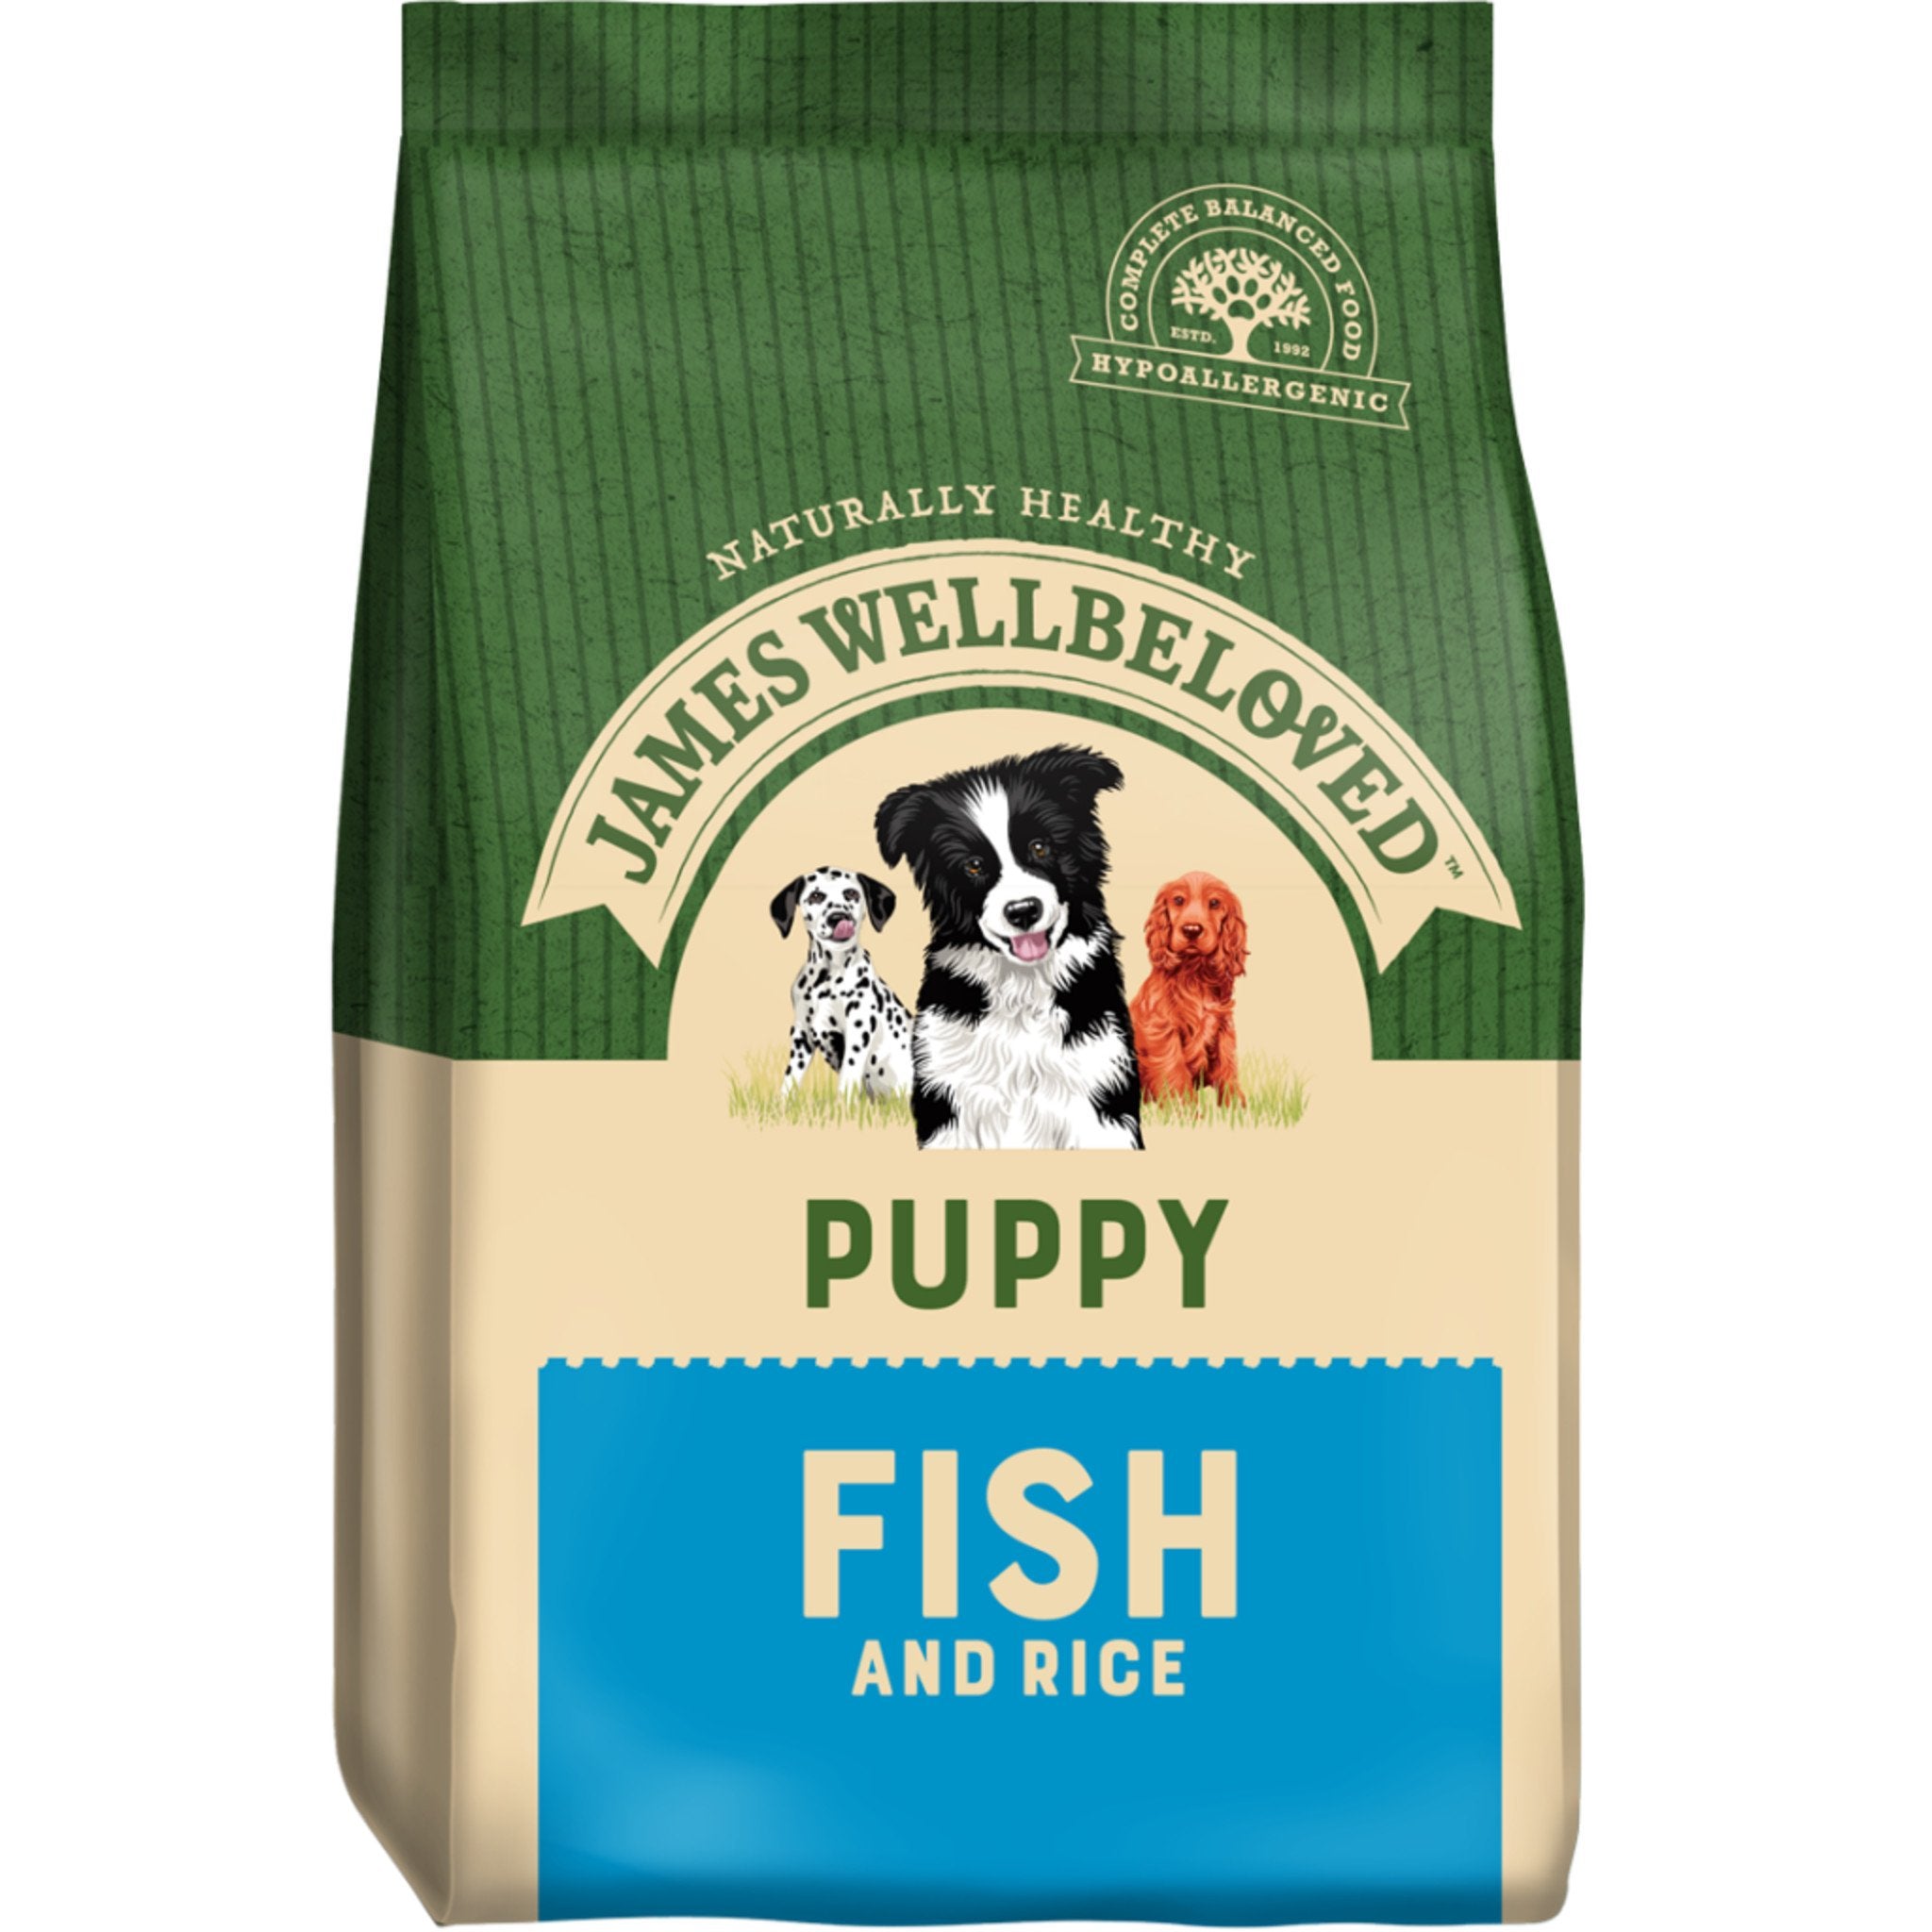 James Wellbeloved Fish Puppy (various sizes)